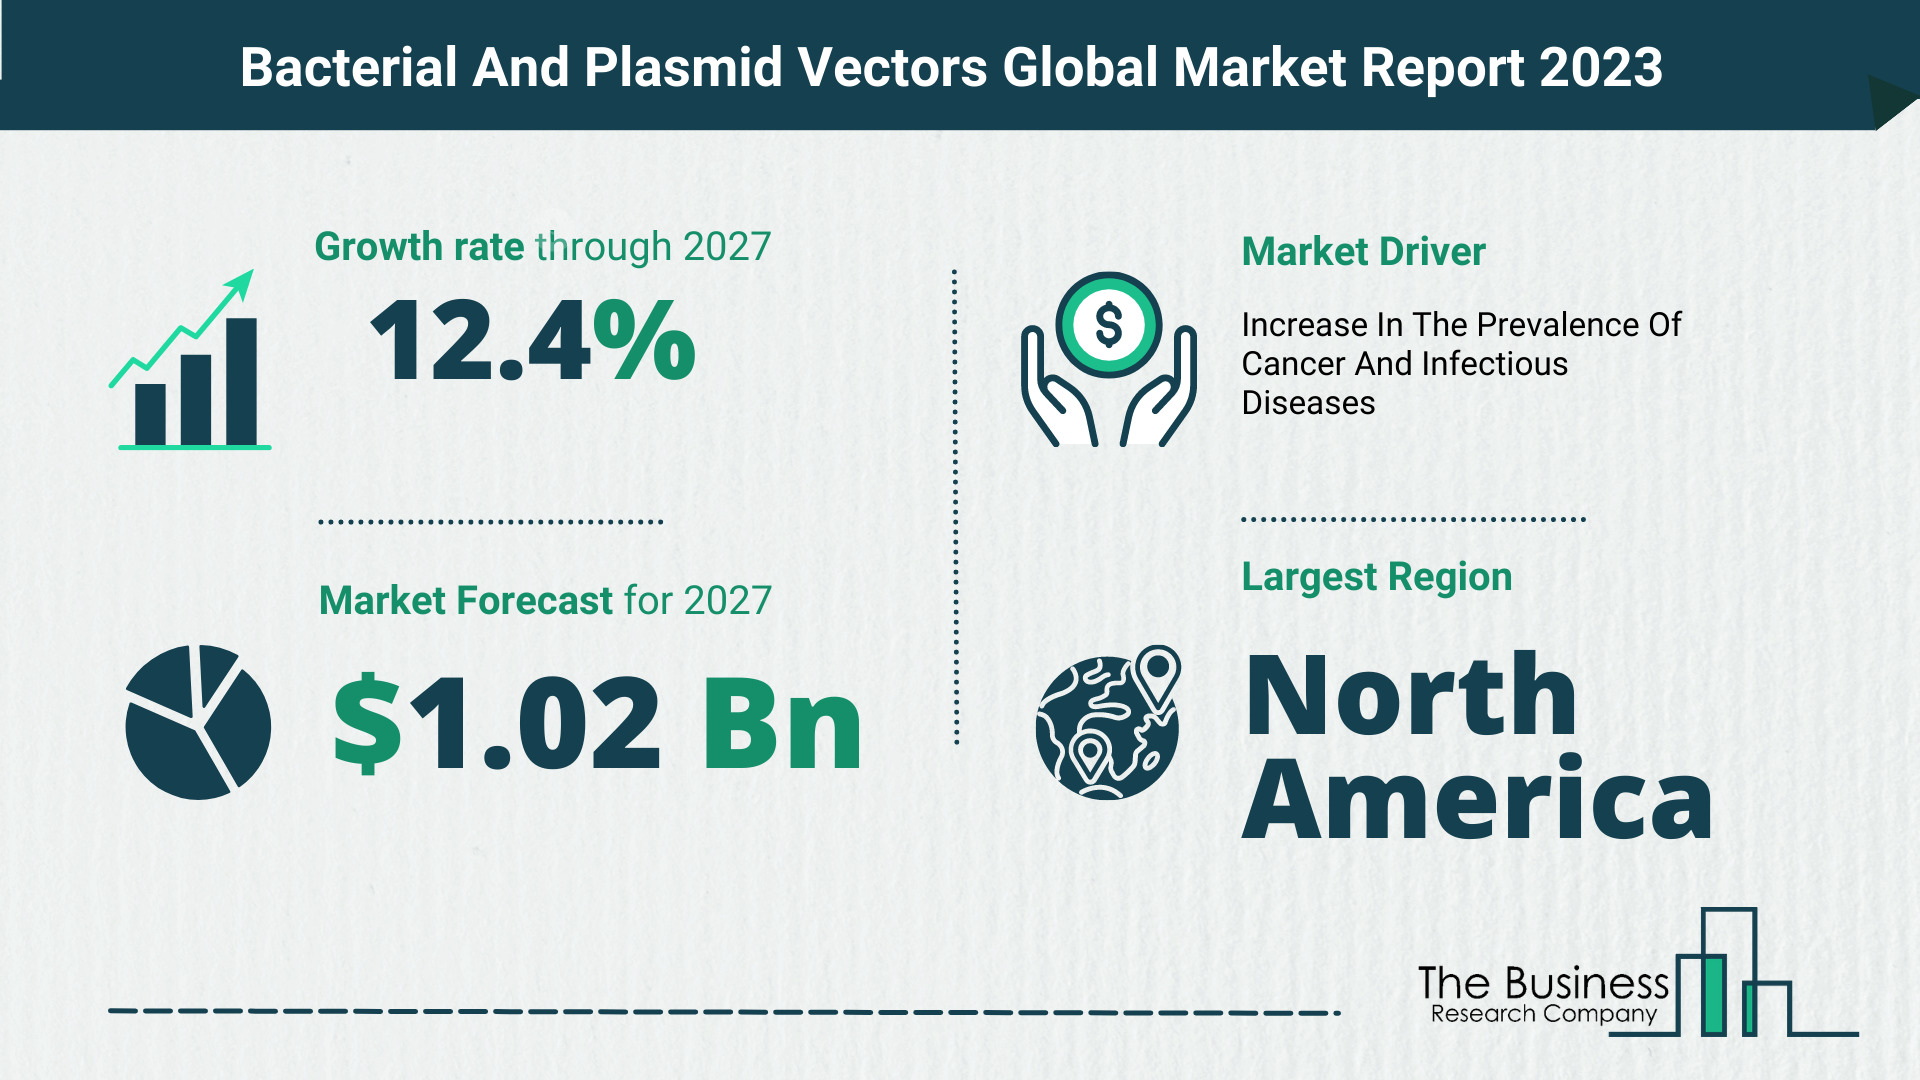 How Will The Bacterial And Plasmid Vectors Market Size Grow In The Coming Years?